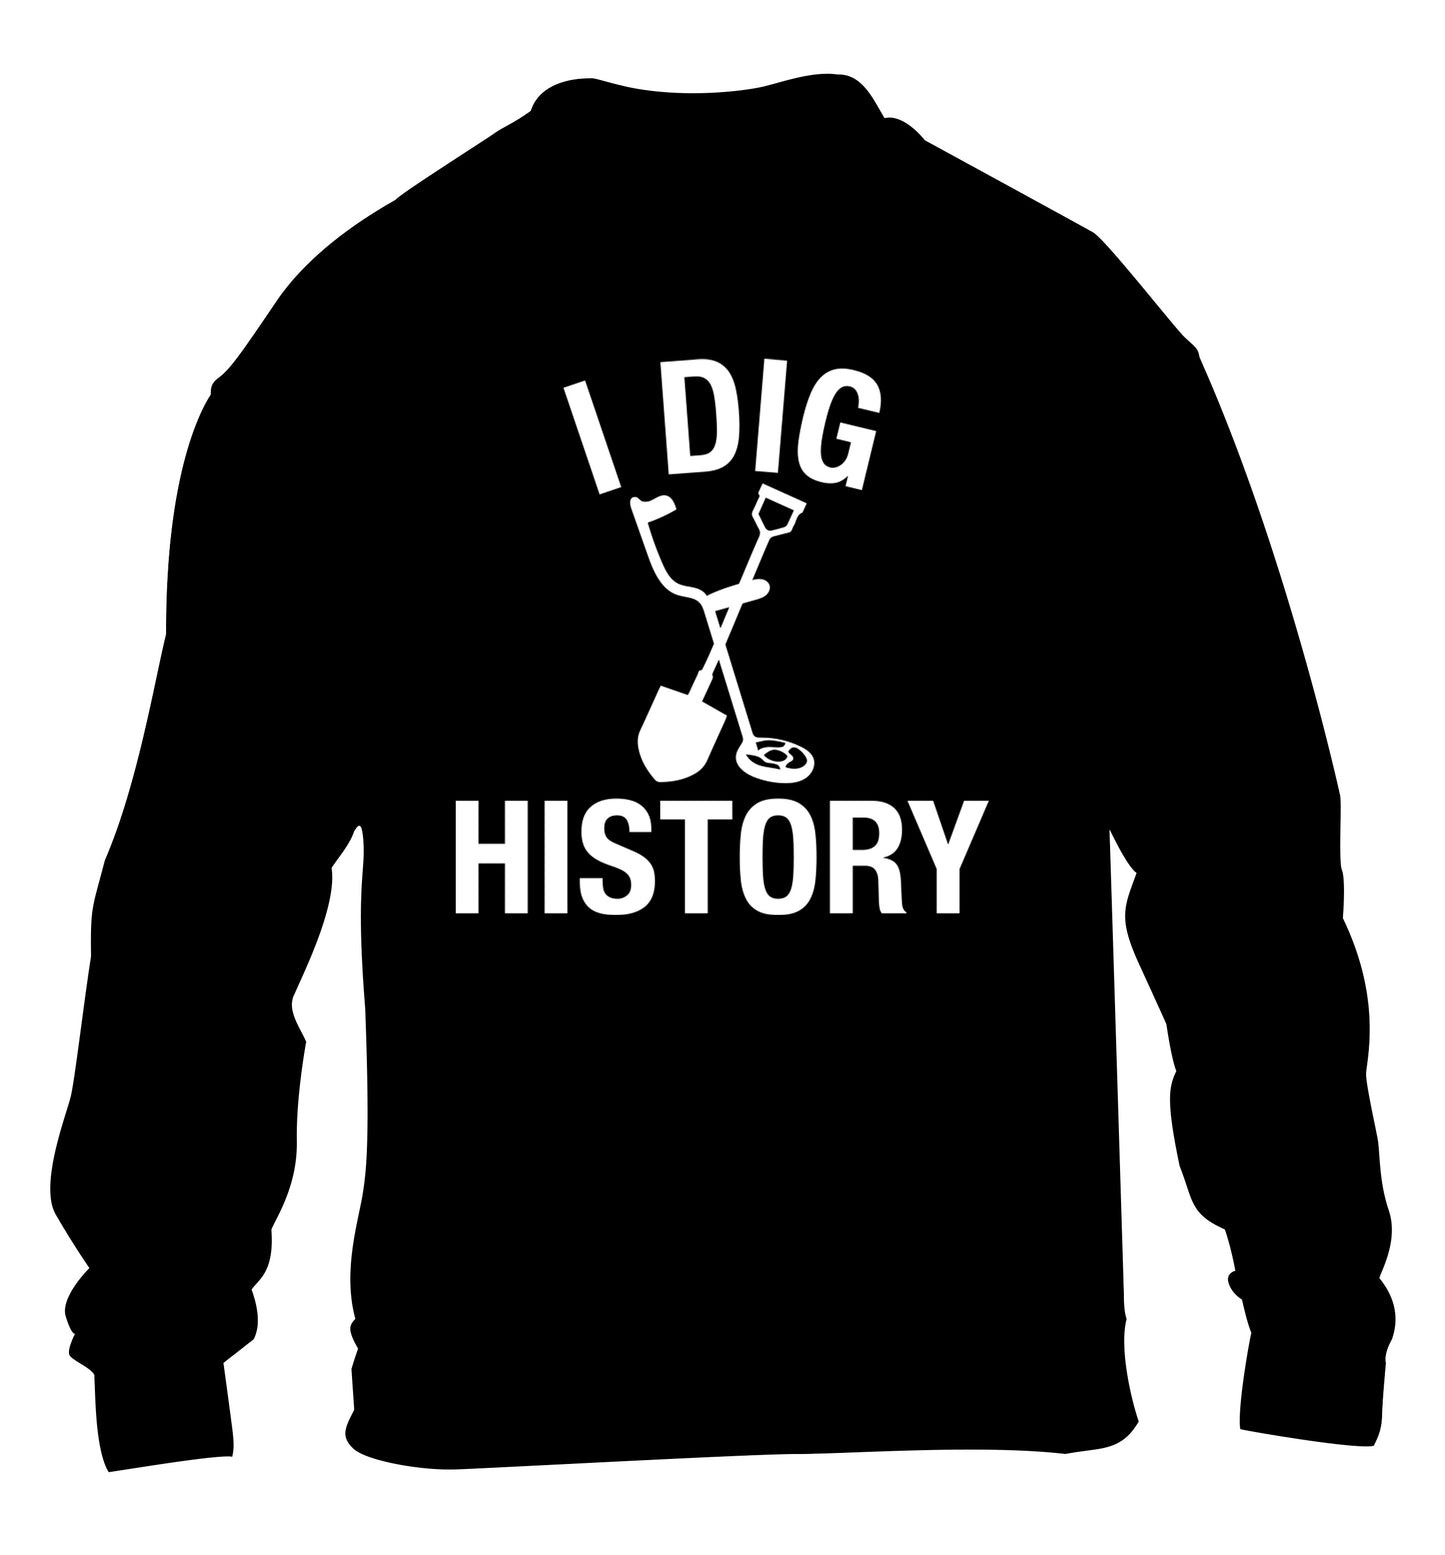 I dig history children's black sweater 12-13 Years